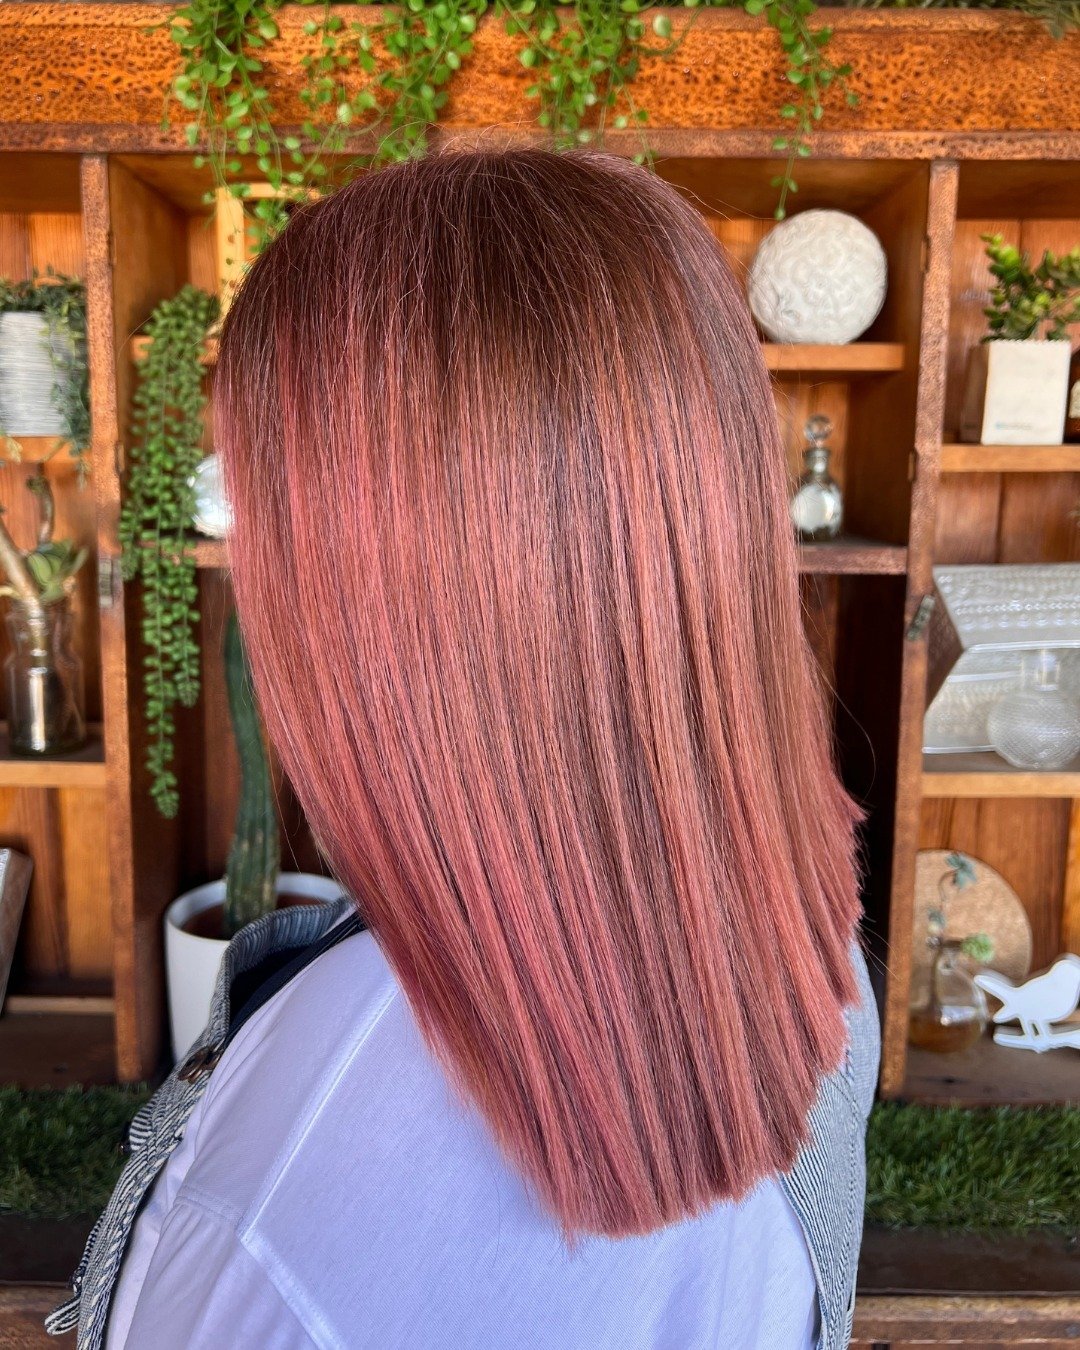 how gorgeous is THAT colour 😍⁠
⁠
colour and cut by claudia and blow dry by chloe 🌿⁠
⁠
#organicministrysalon #adelaidehairsalon #adelaideorganicsalon #lowtoxsalon #adelaidehairdresser #organicbeauty #naturalhaircare #holistichaircare #organicsalon #